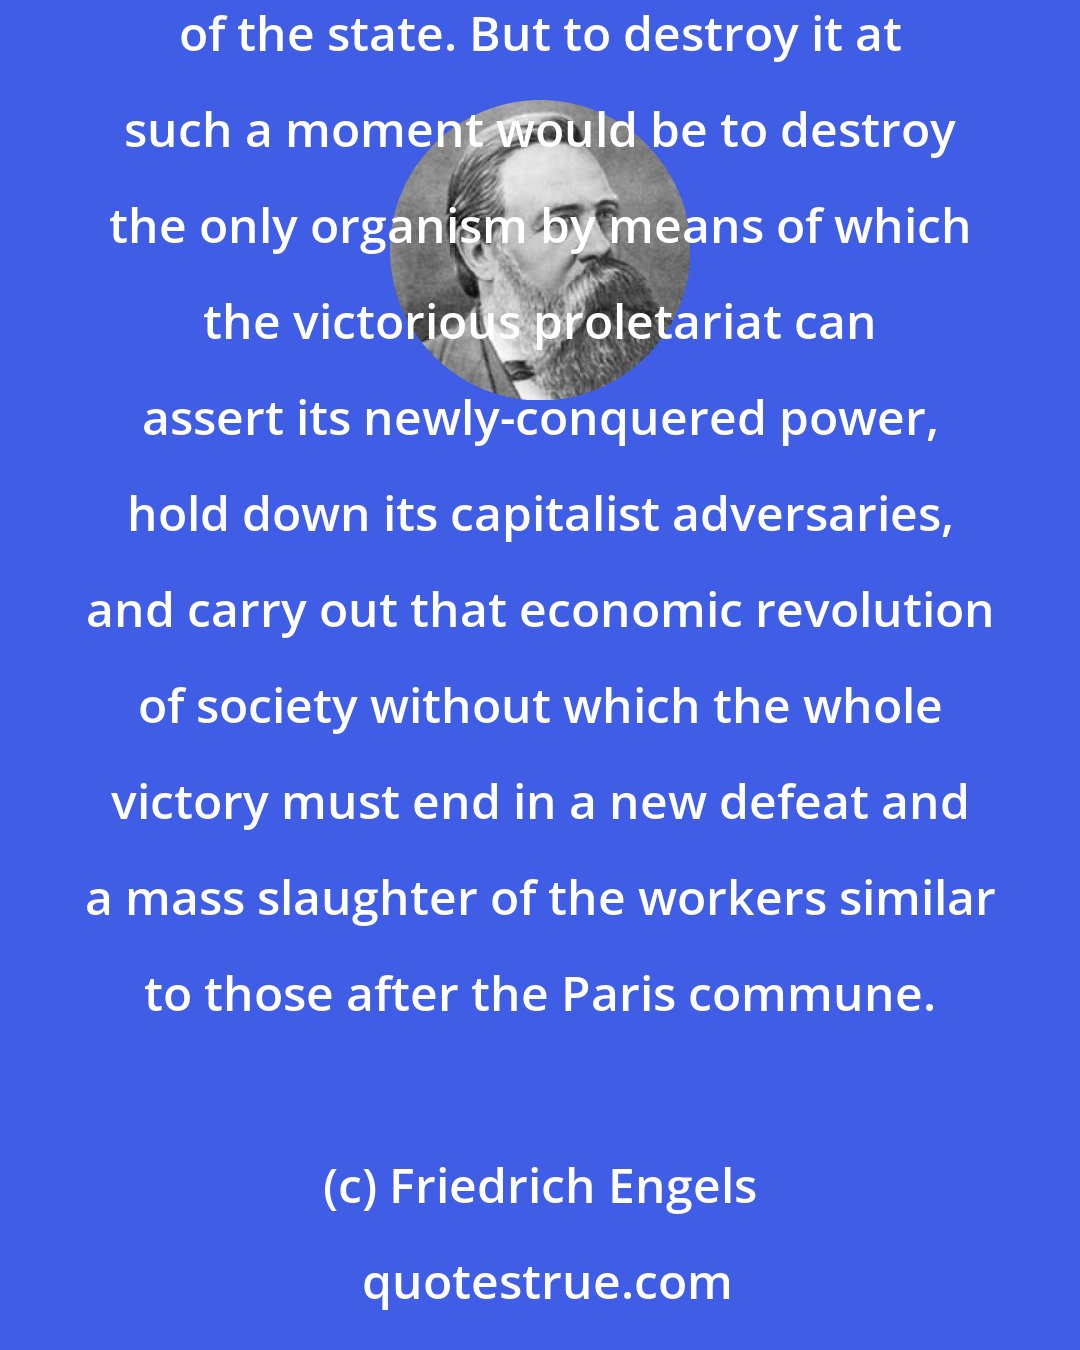 Friedrich Engels: The anarchists put the thing upside down. They declare that the proletarian revolution must begin by doing away with the political organization of the state. But to destroy it at such a moment would be to destroy the only organism by means of which the victorious proletariat can assert its newly-conquered power, hold down its capitalist adversaries, and carry out that economic revolution of society without which the whole victory must end in a new defeat and a mass slaughter of the workers similar to those after the Paris commune.